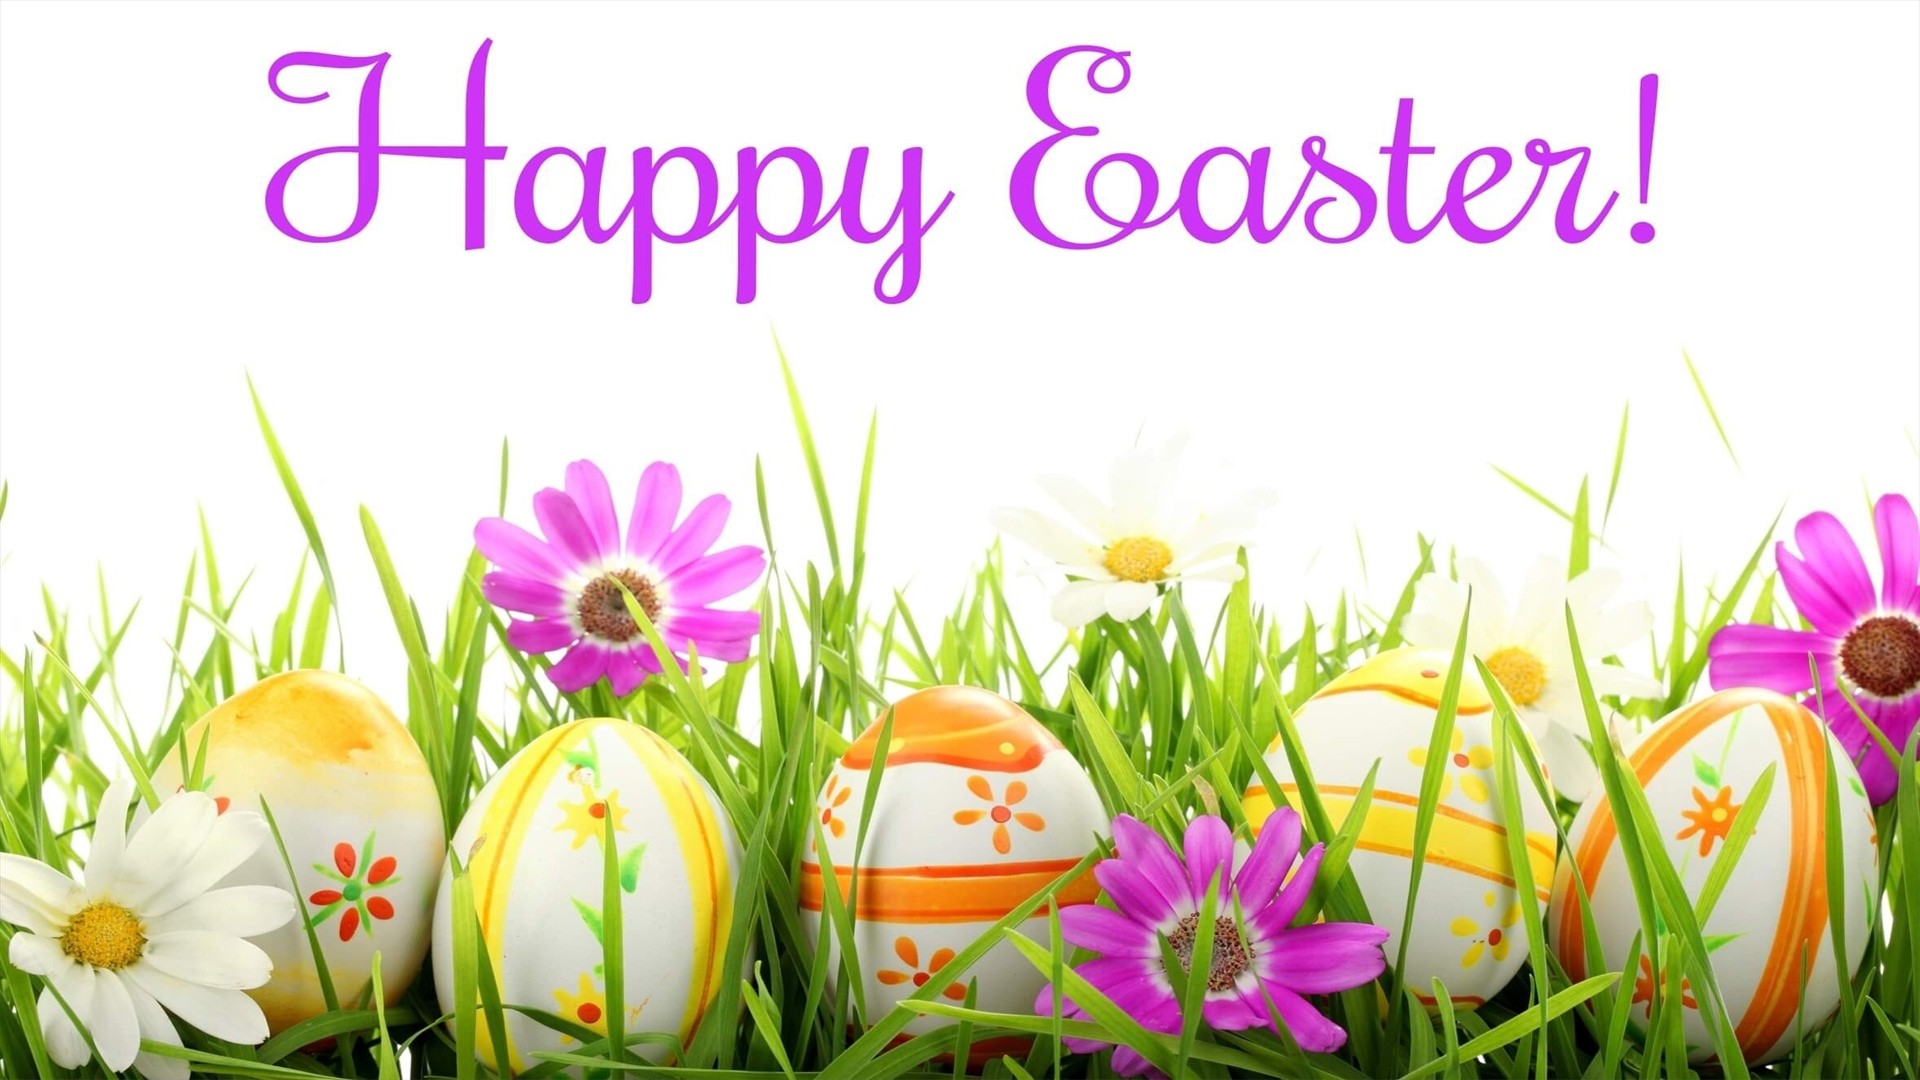 Happy Easter Image Pic